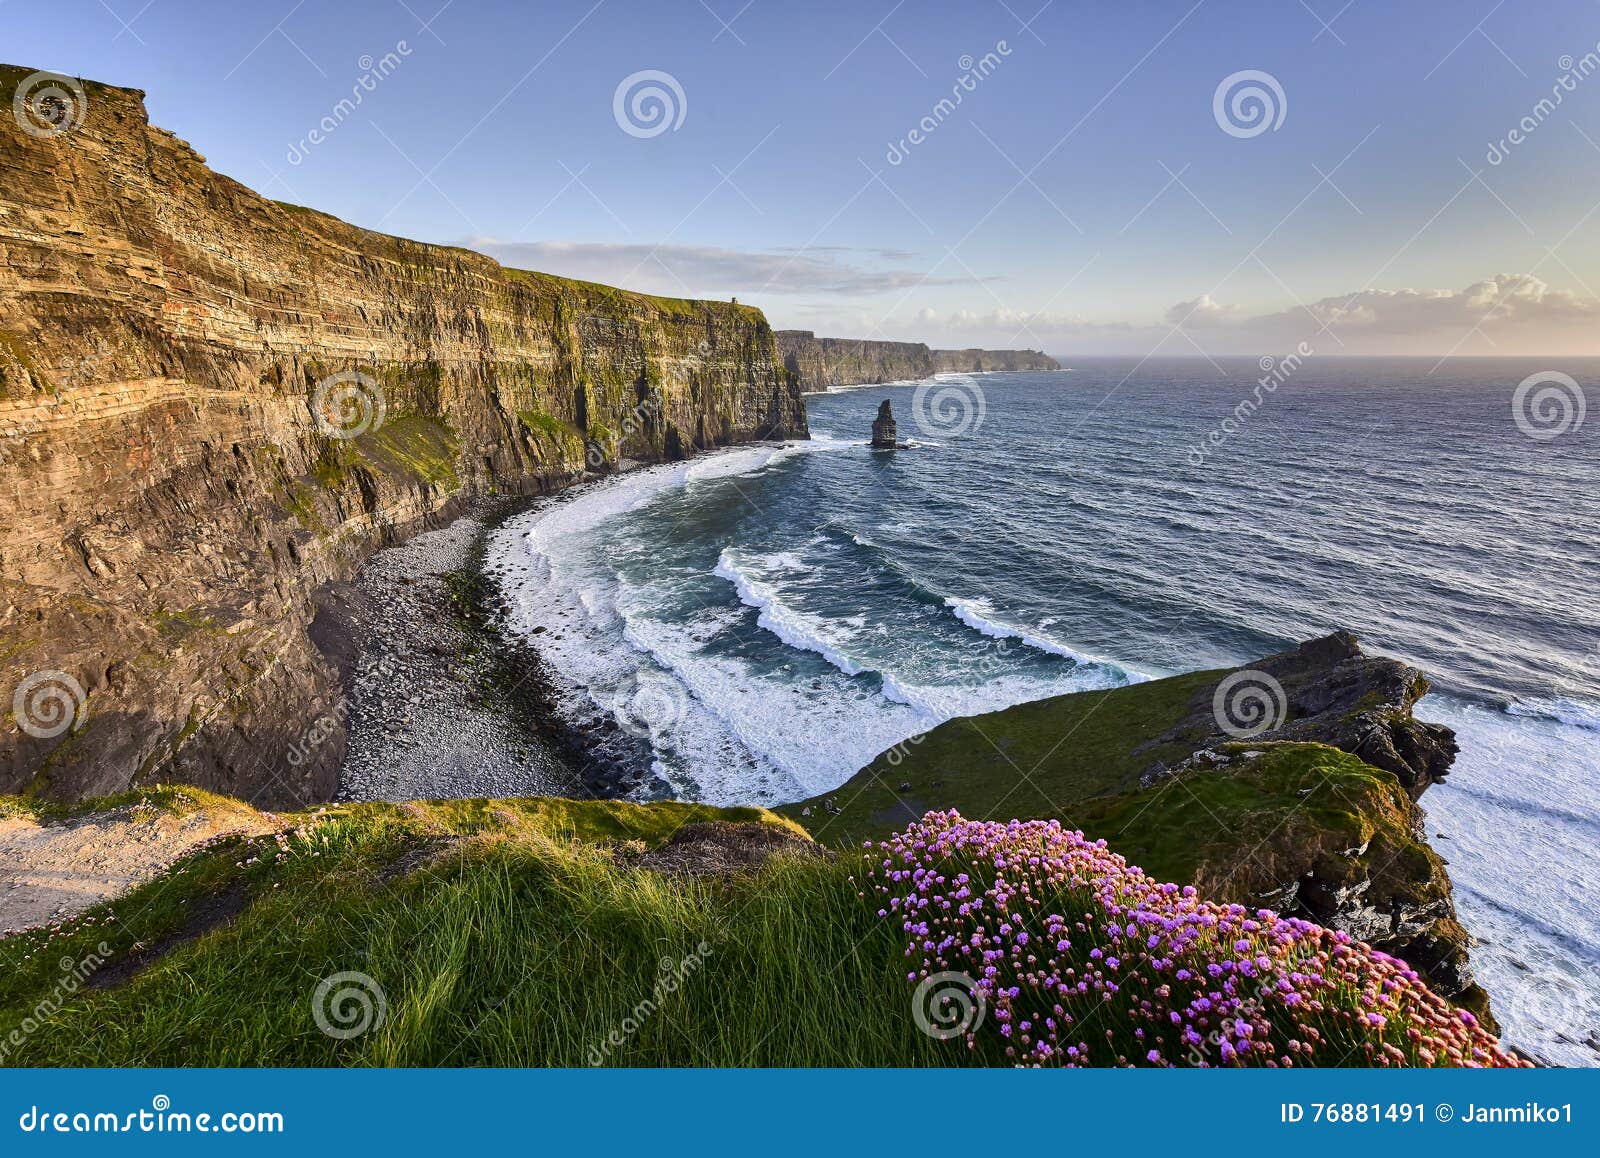 cliffs of moher at sunset, co. clare